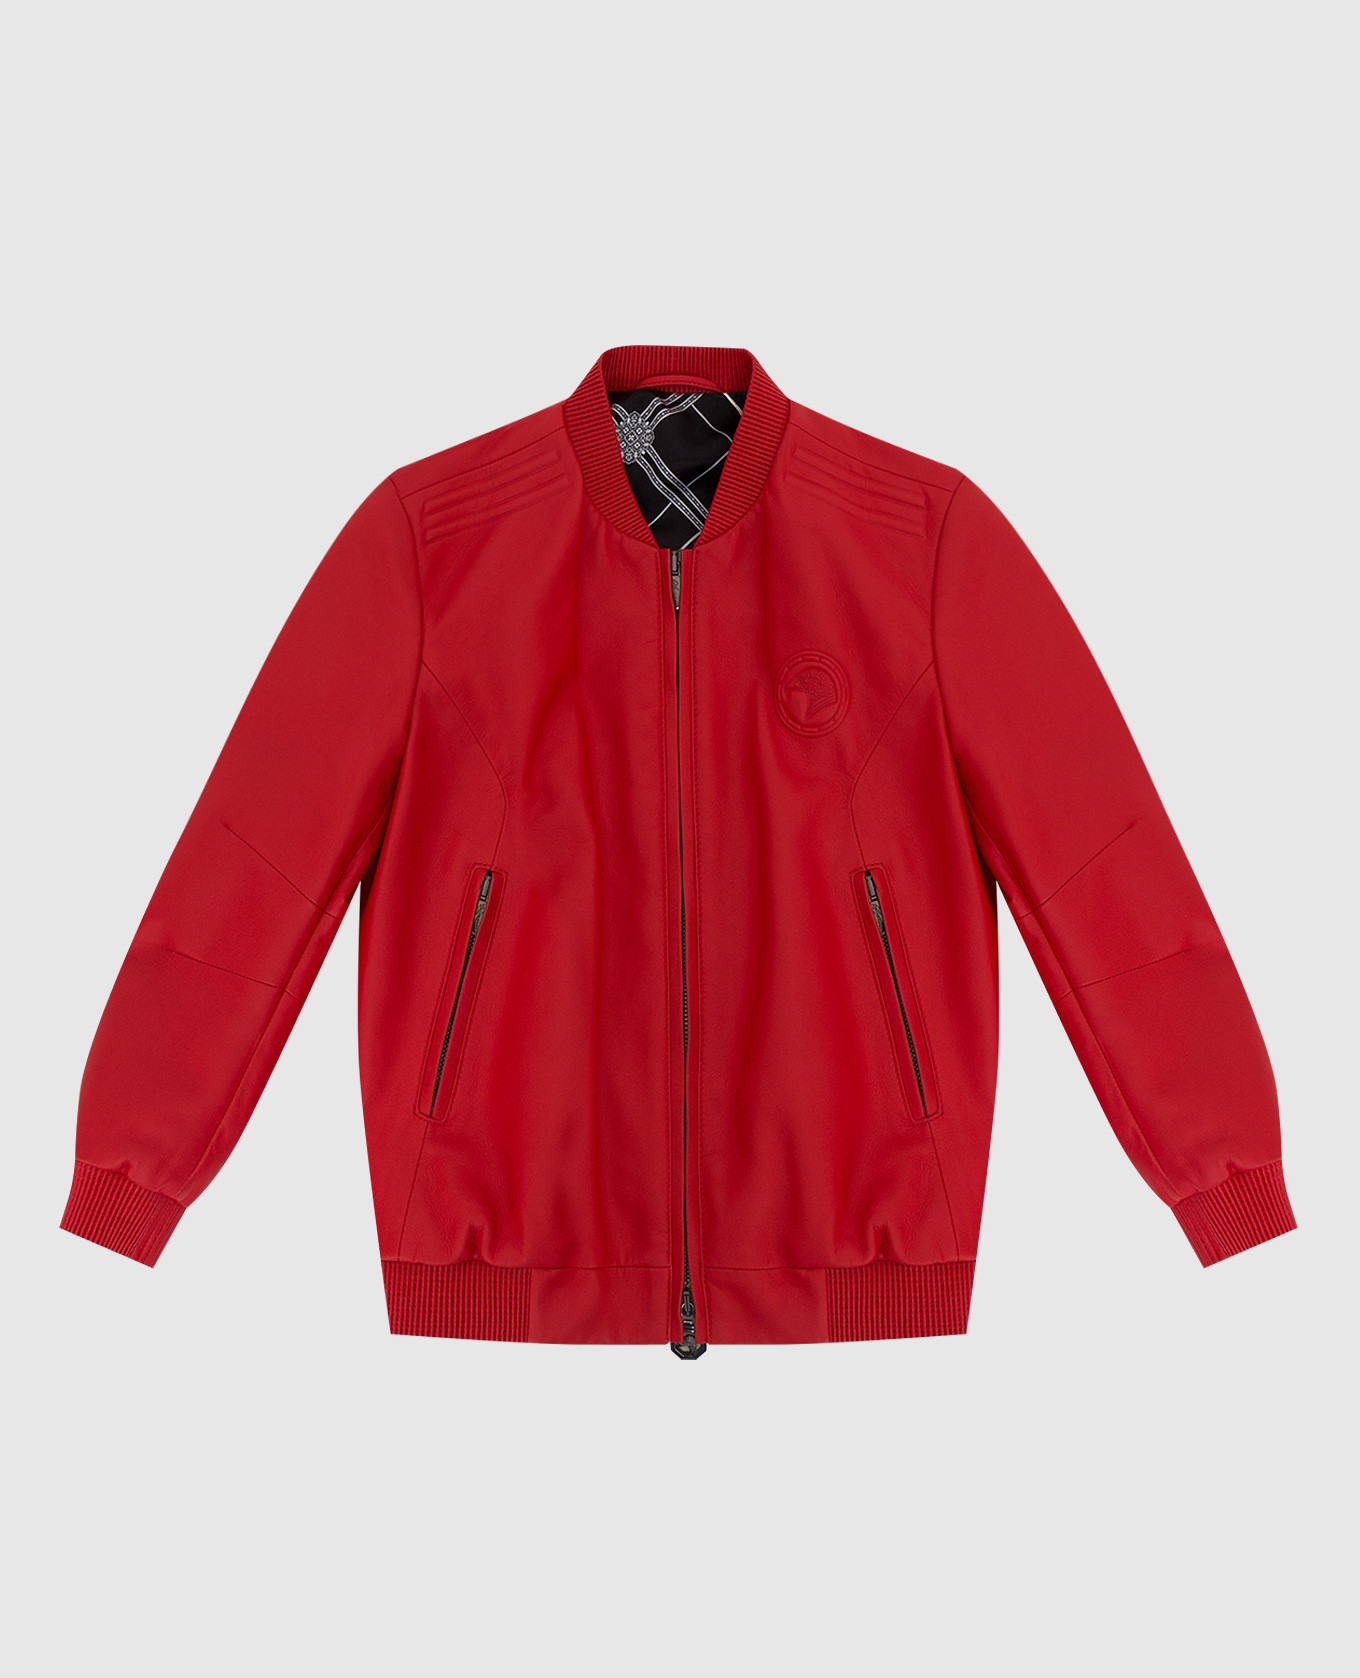 Children's red leather bomber jacket